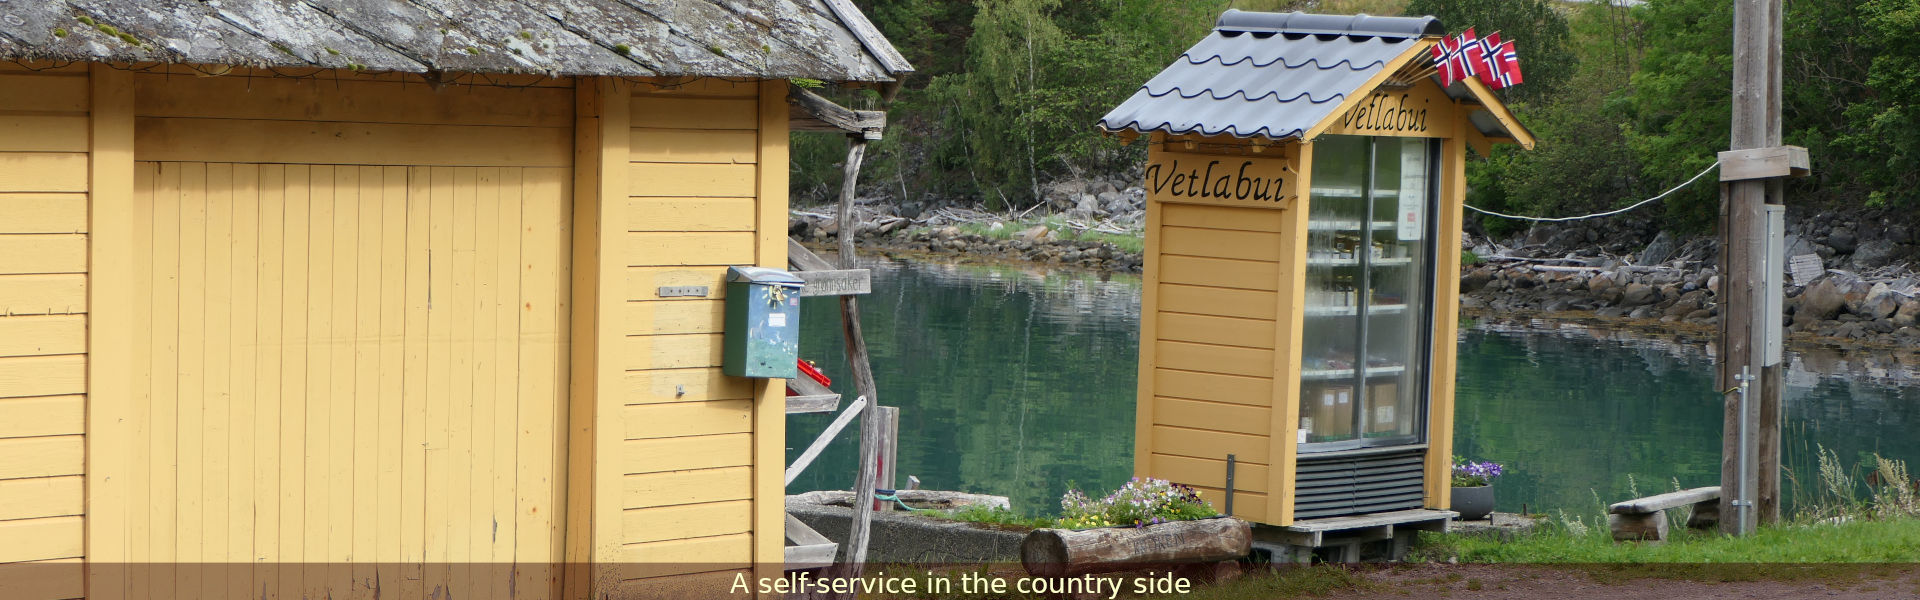 a self service in the country side, Norway